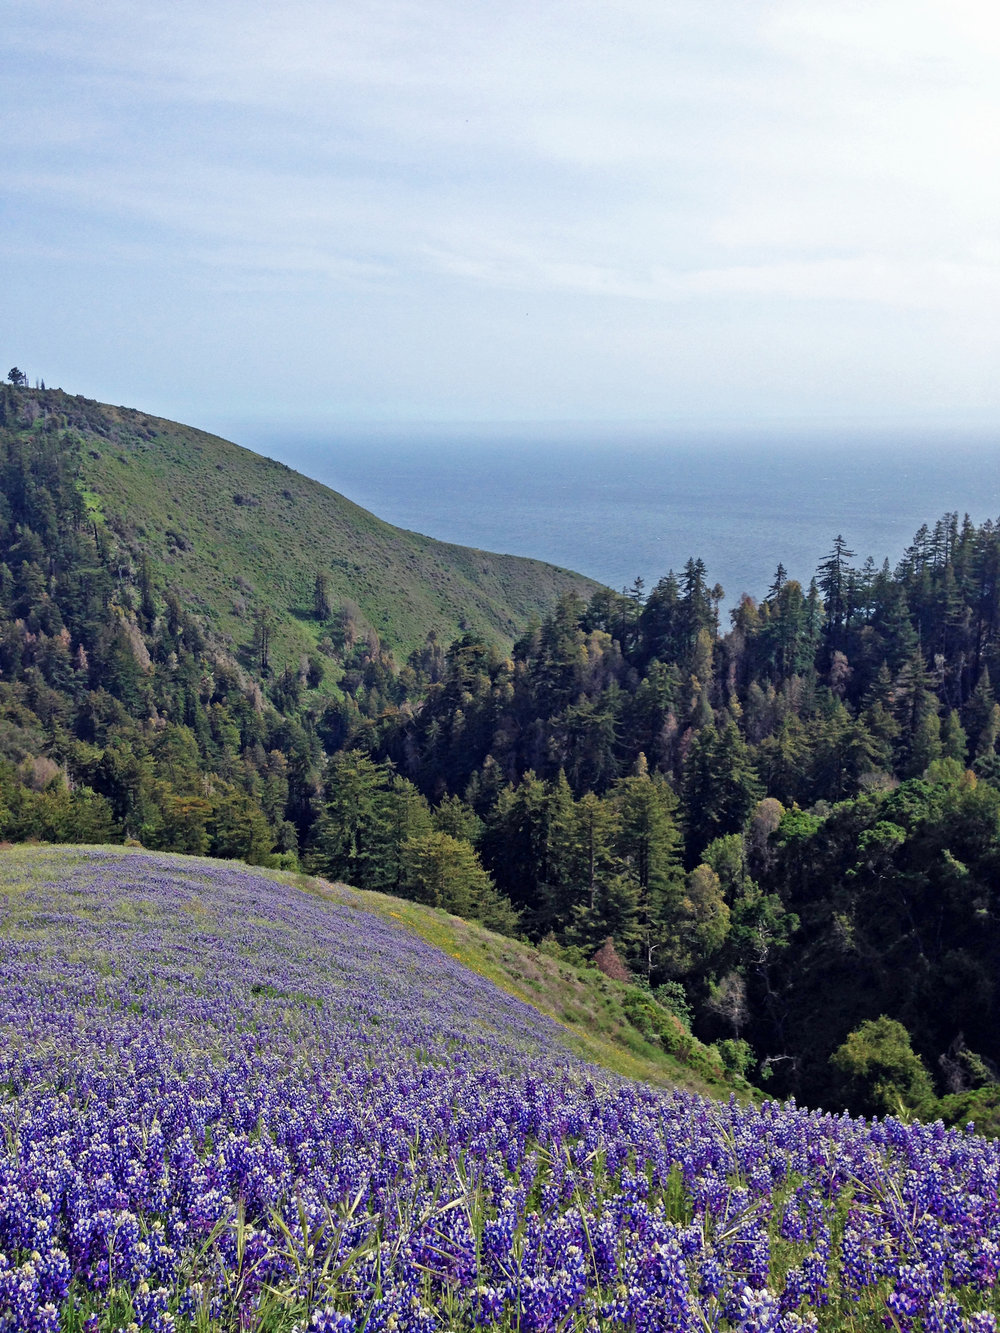 a field of lupin flowers with views of the pacific ocean in the distance